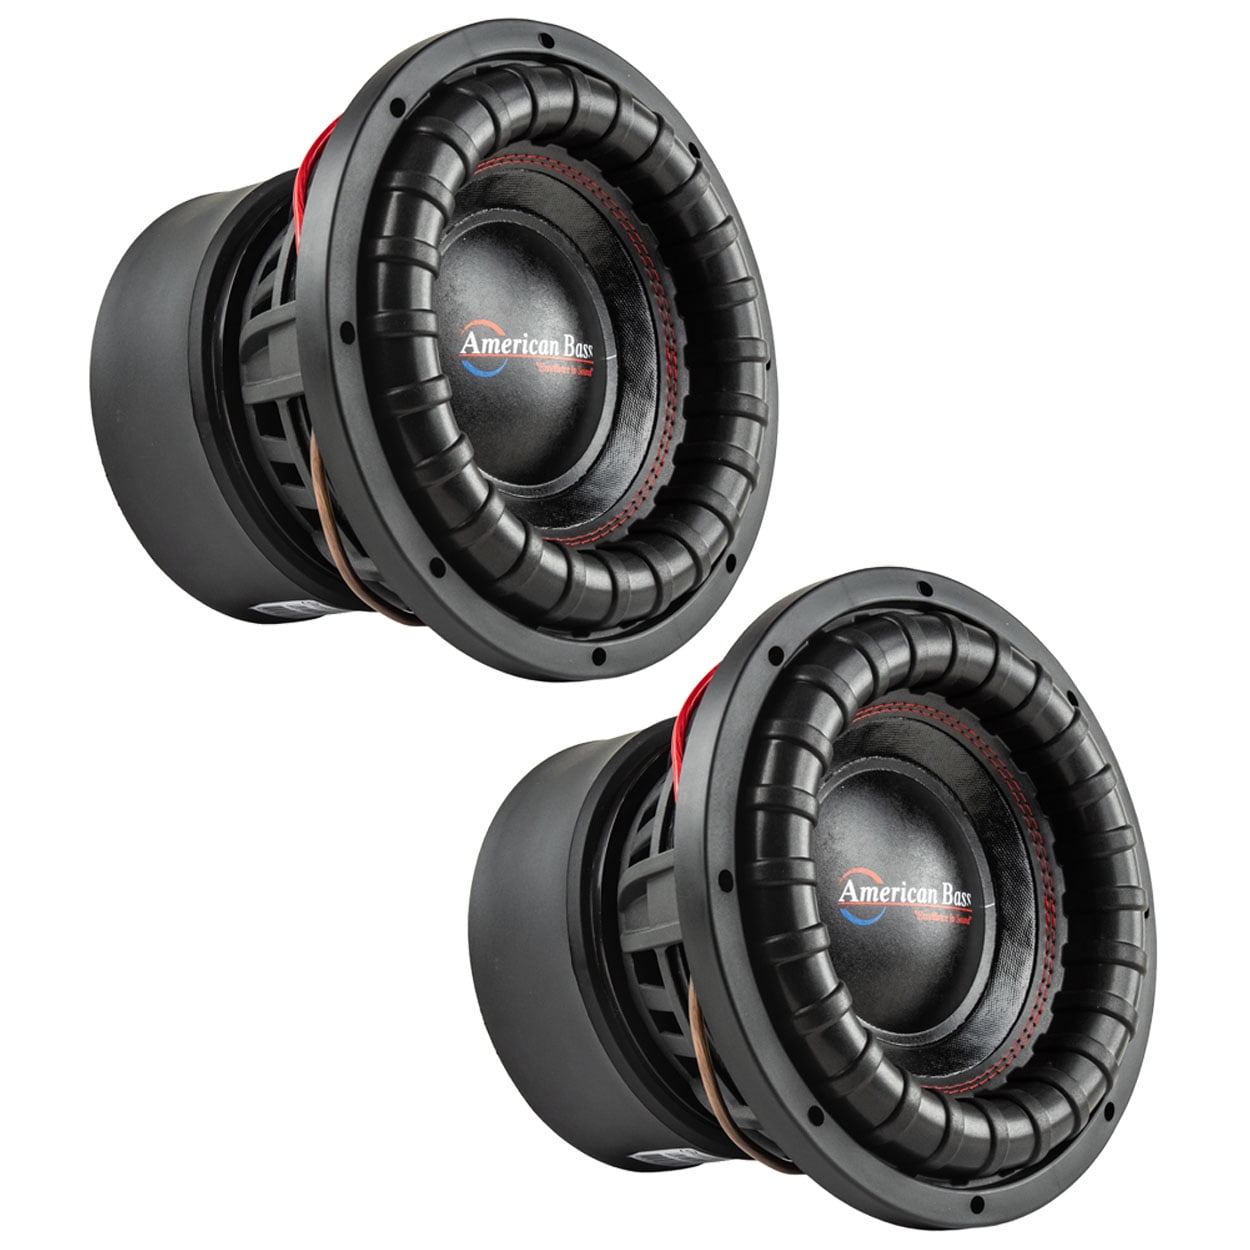 10 inch Bass Surround Speaker American Bass 10 Competition Car Subwoofer 3000 Watt Maximum Power Car Audio Stereo Subwoofer Dual 4 Ohm Voice Coil 